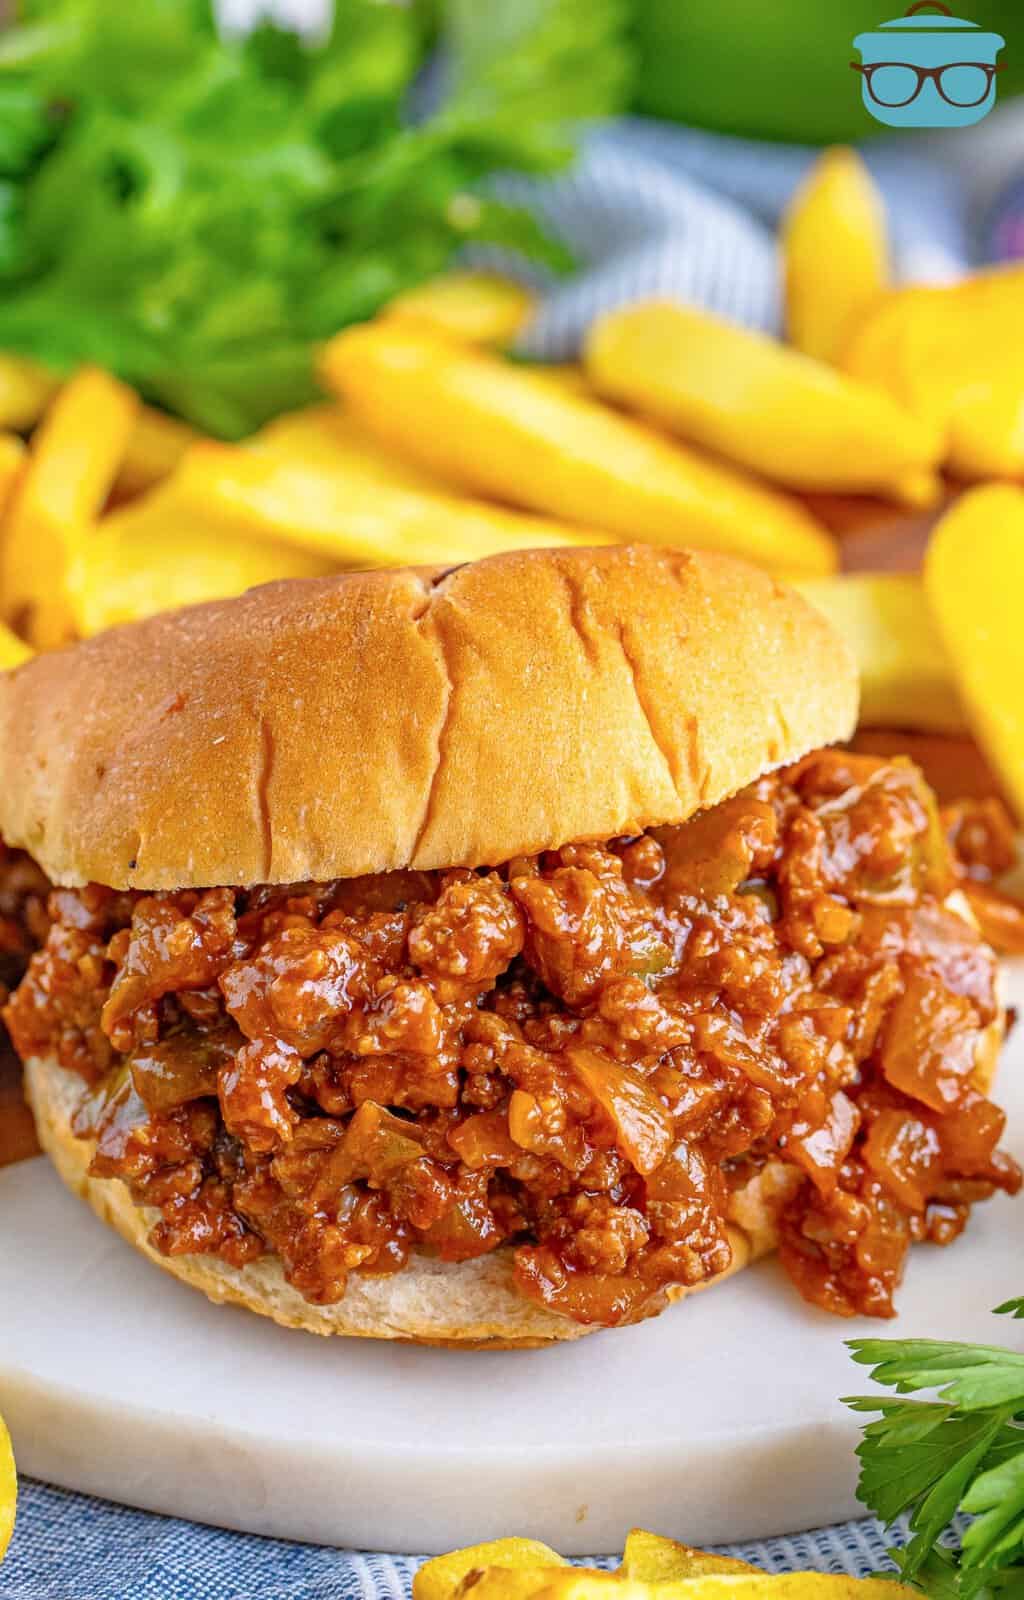 A plate with an overflowing Dr Pepper Sloppy Joe.